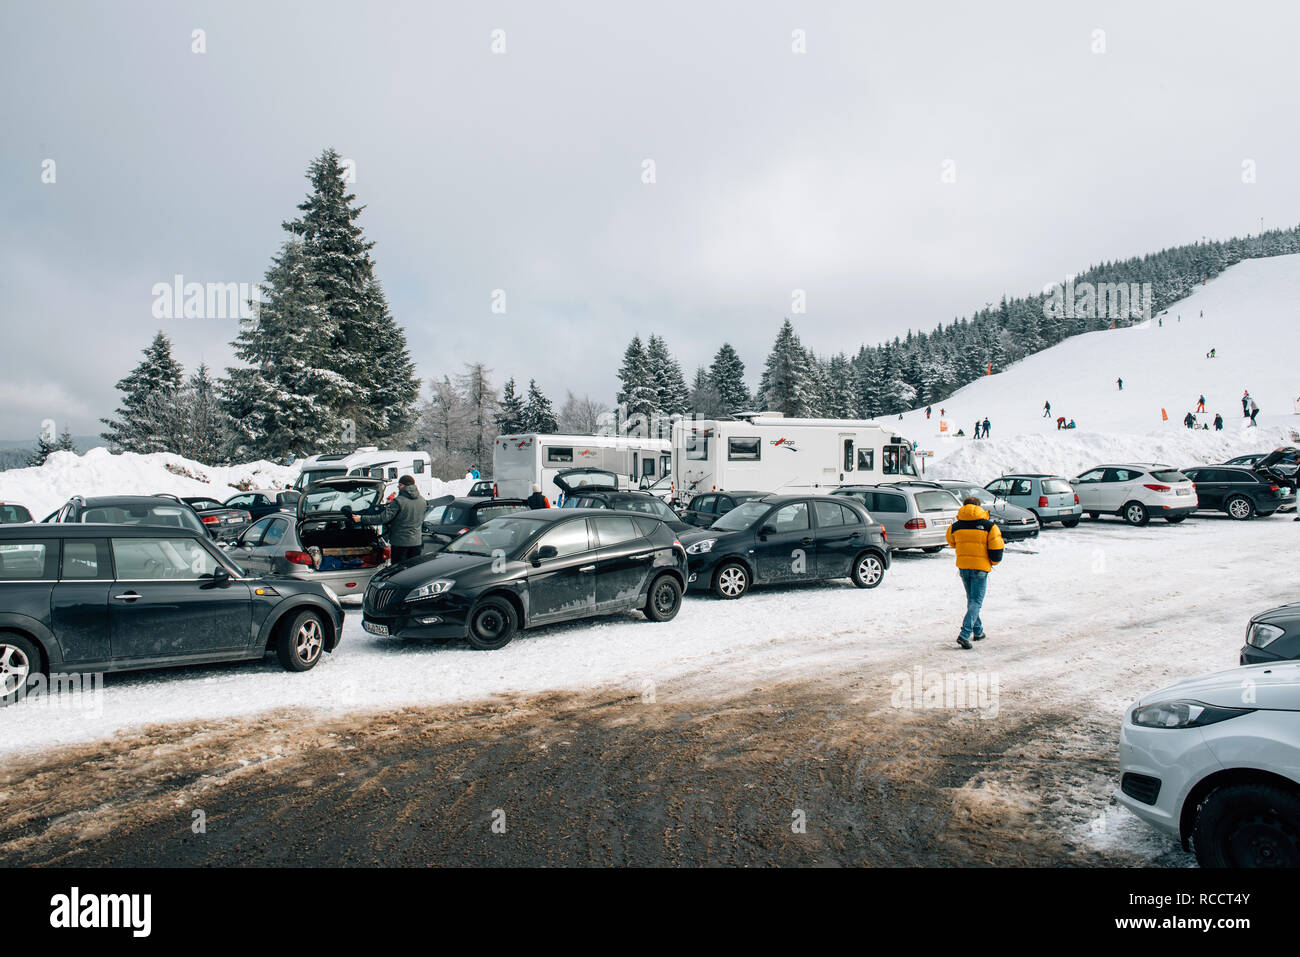 MUMMELSEE, GERMANY - FEB 18, 2018: Snow and ski slope seen from parking area with people kids, parents having fun in German mountains Stock Photo